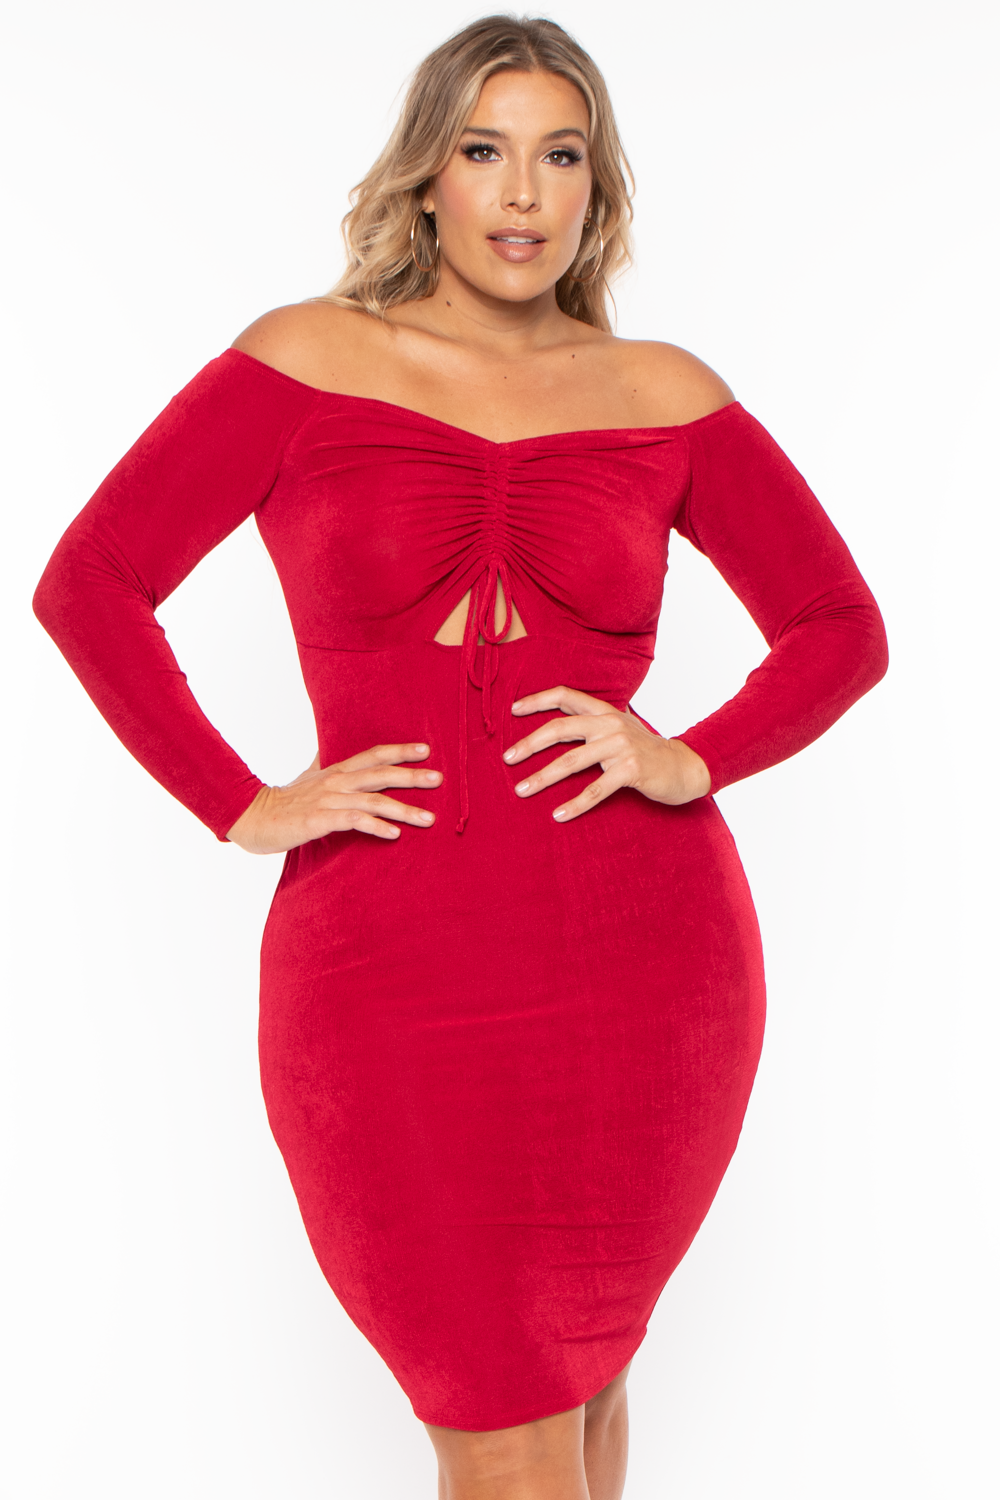 Plus Size Aveline Ruched Dress - Red - Curvy Sense